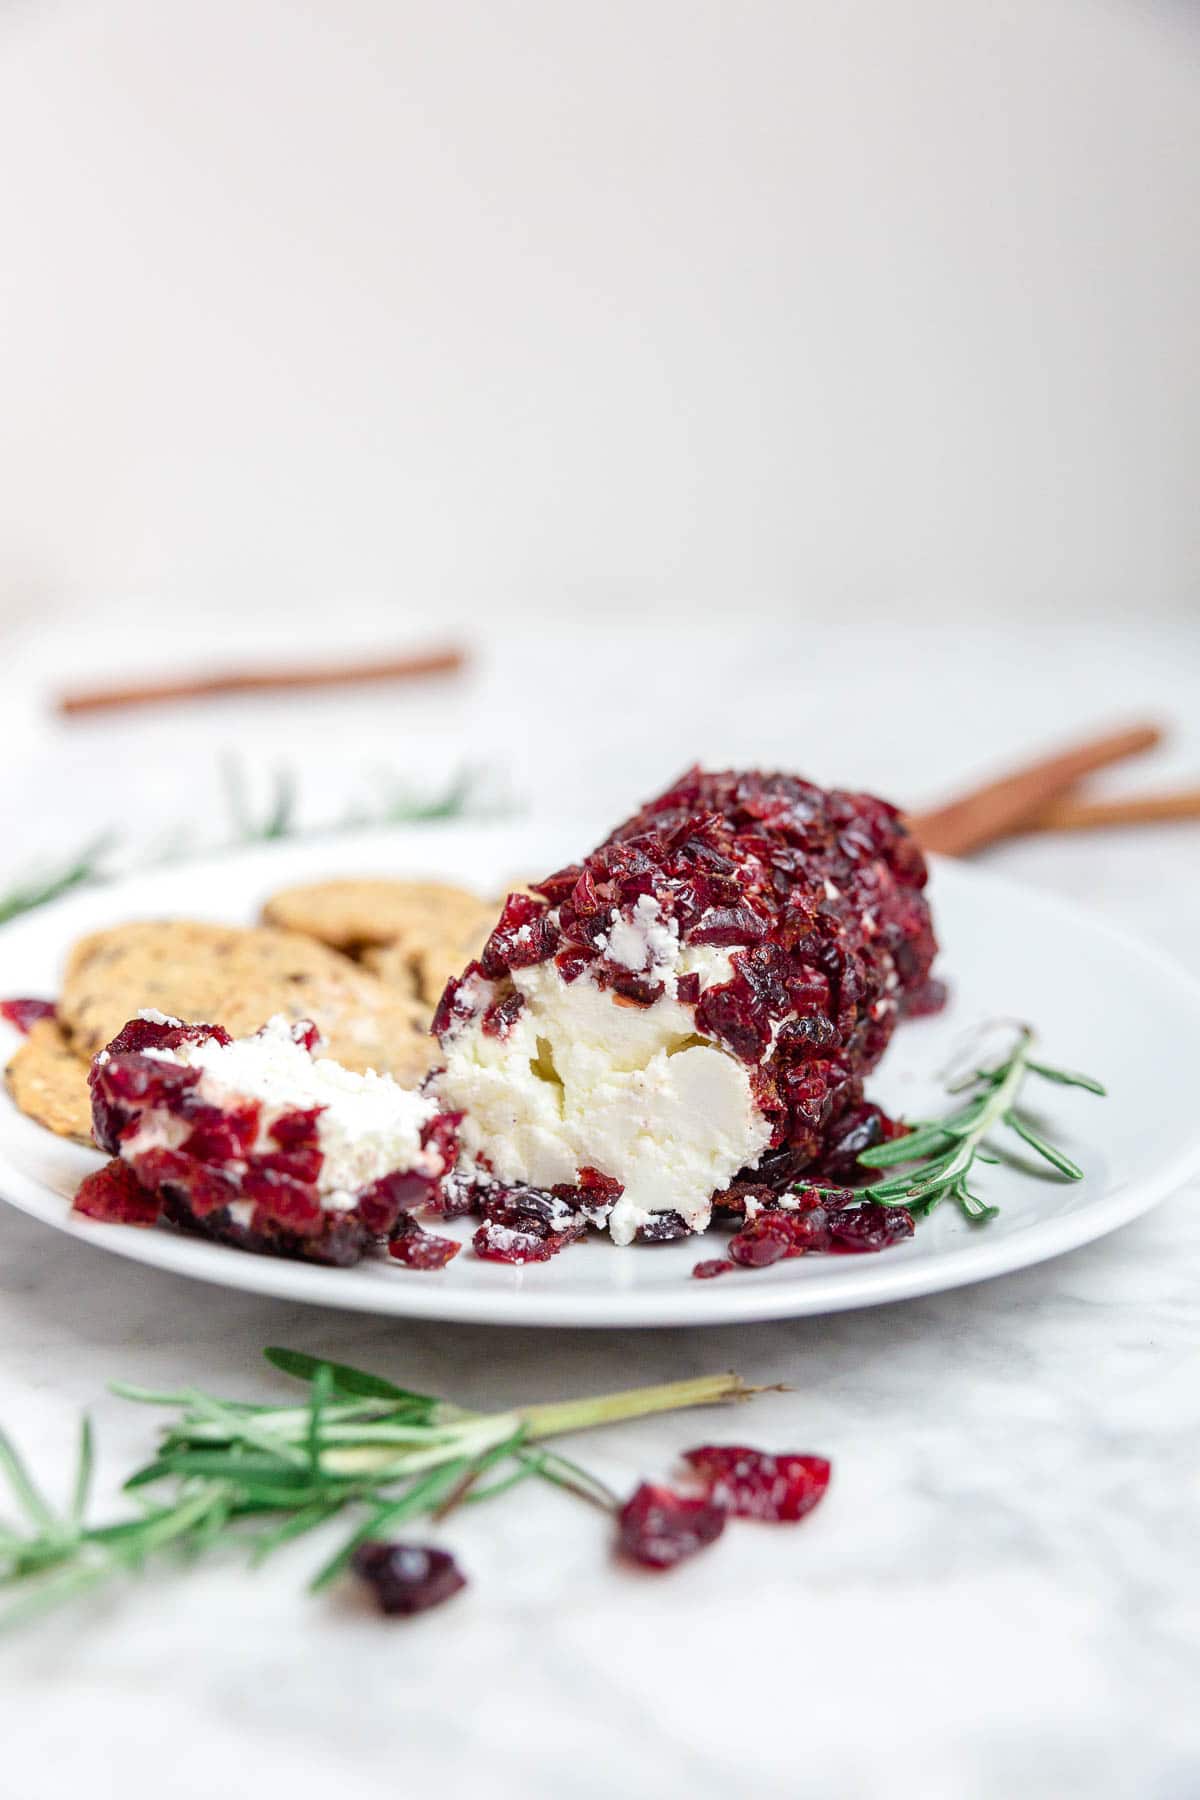 Cranberry cinnamon goat cheese log on a plate with gluten-free crackers.